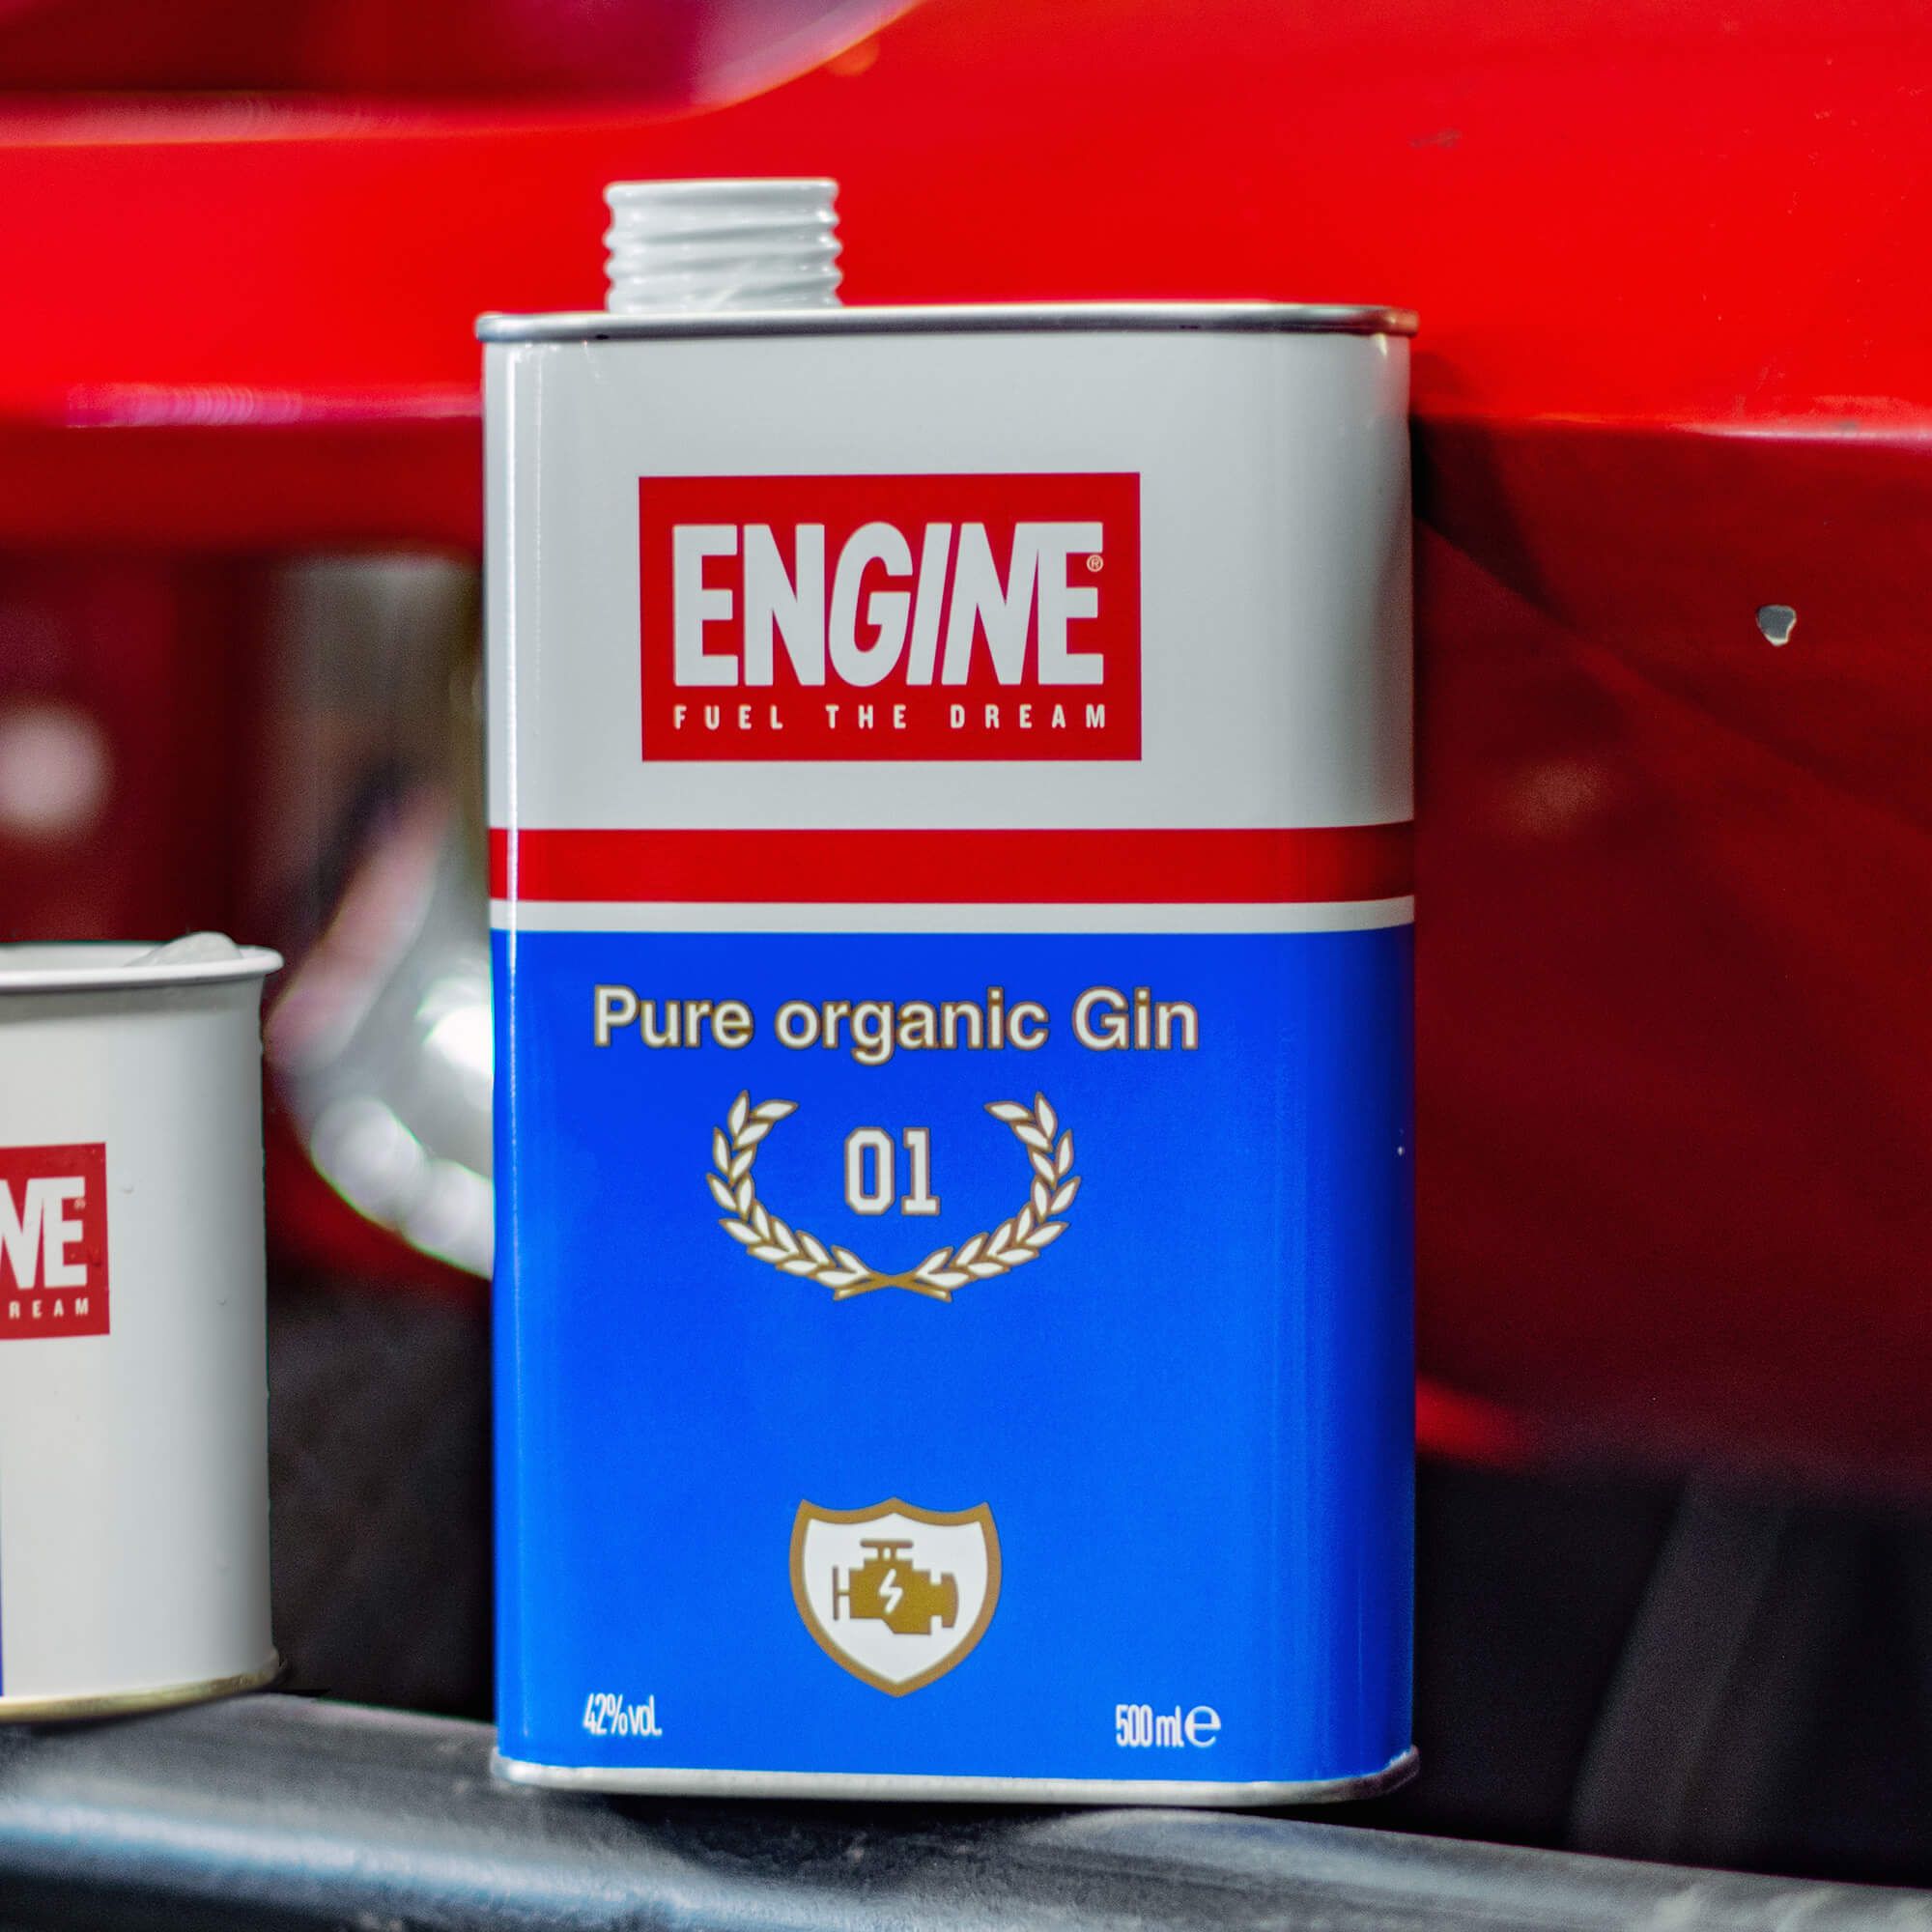 Engine Gin, ABV 40% 70cl